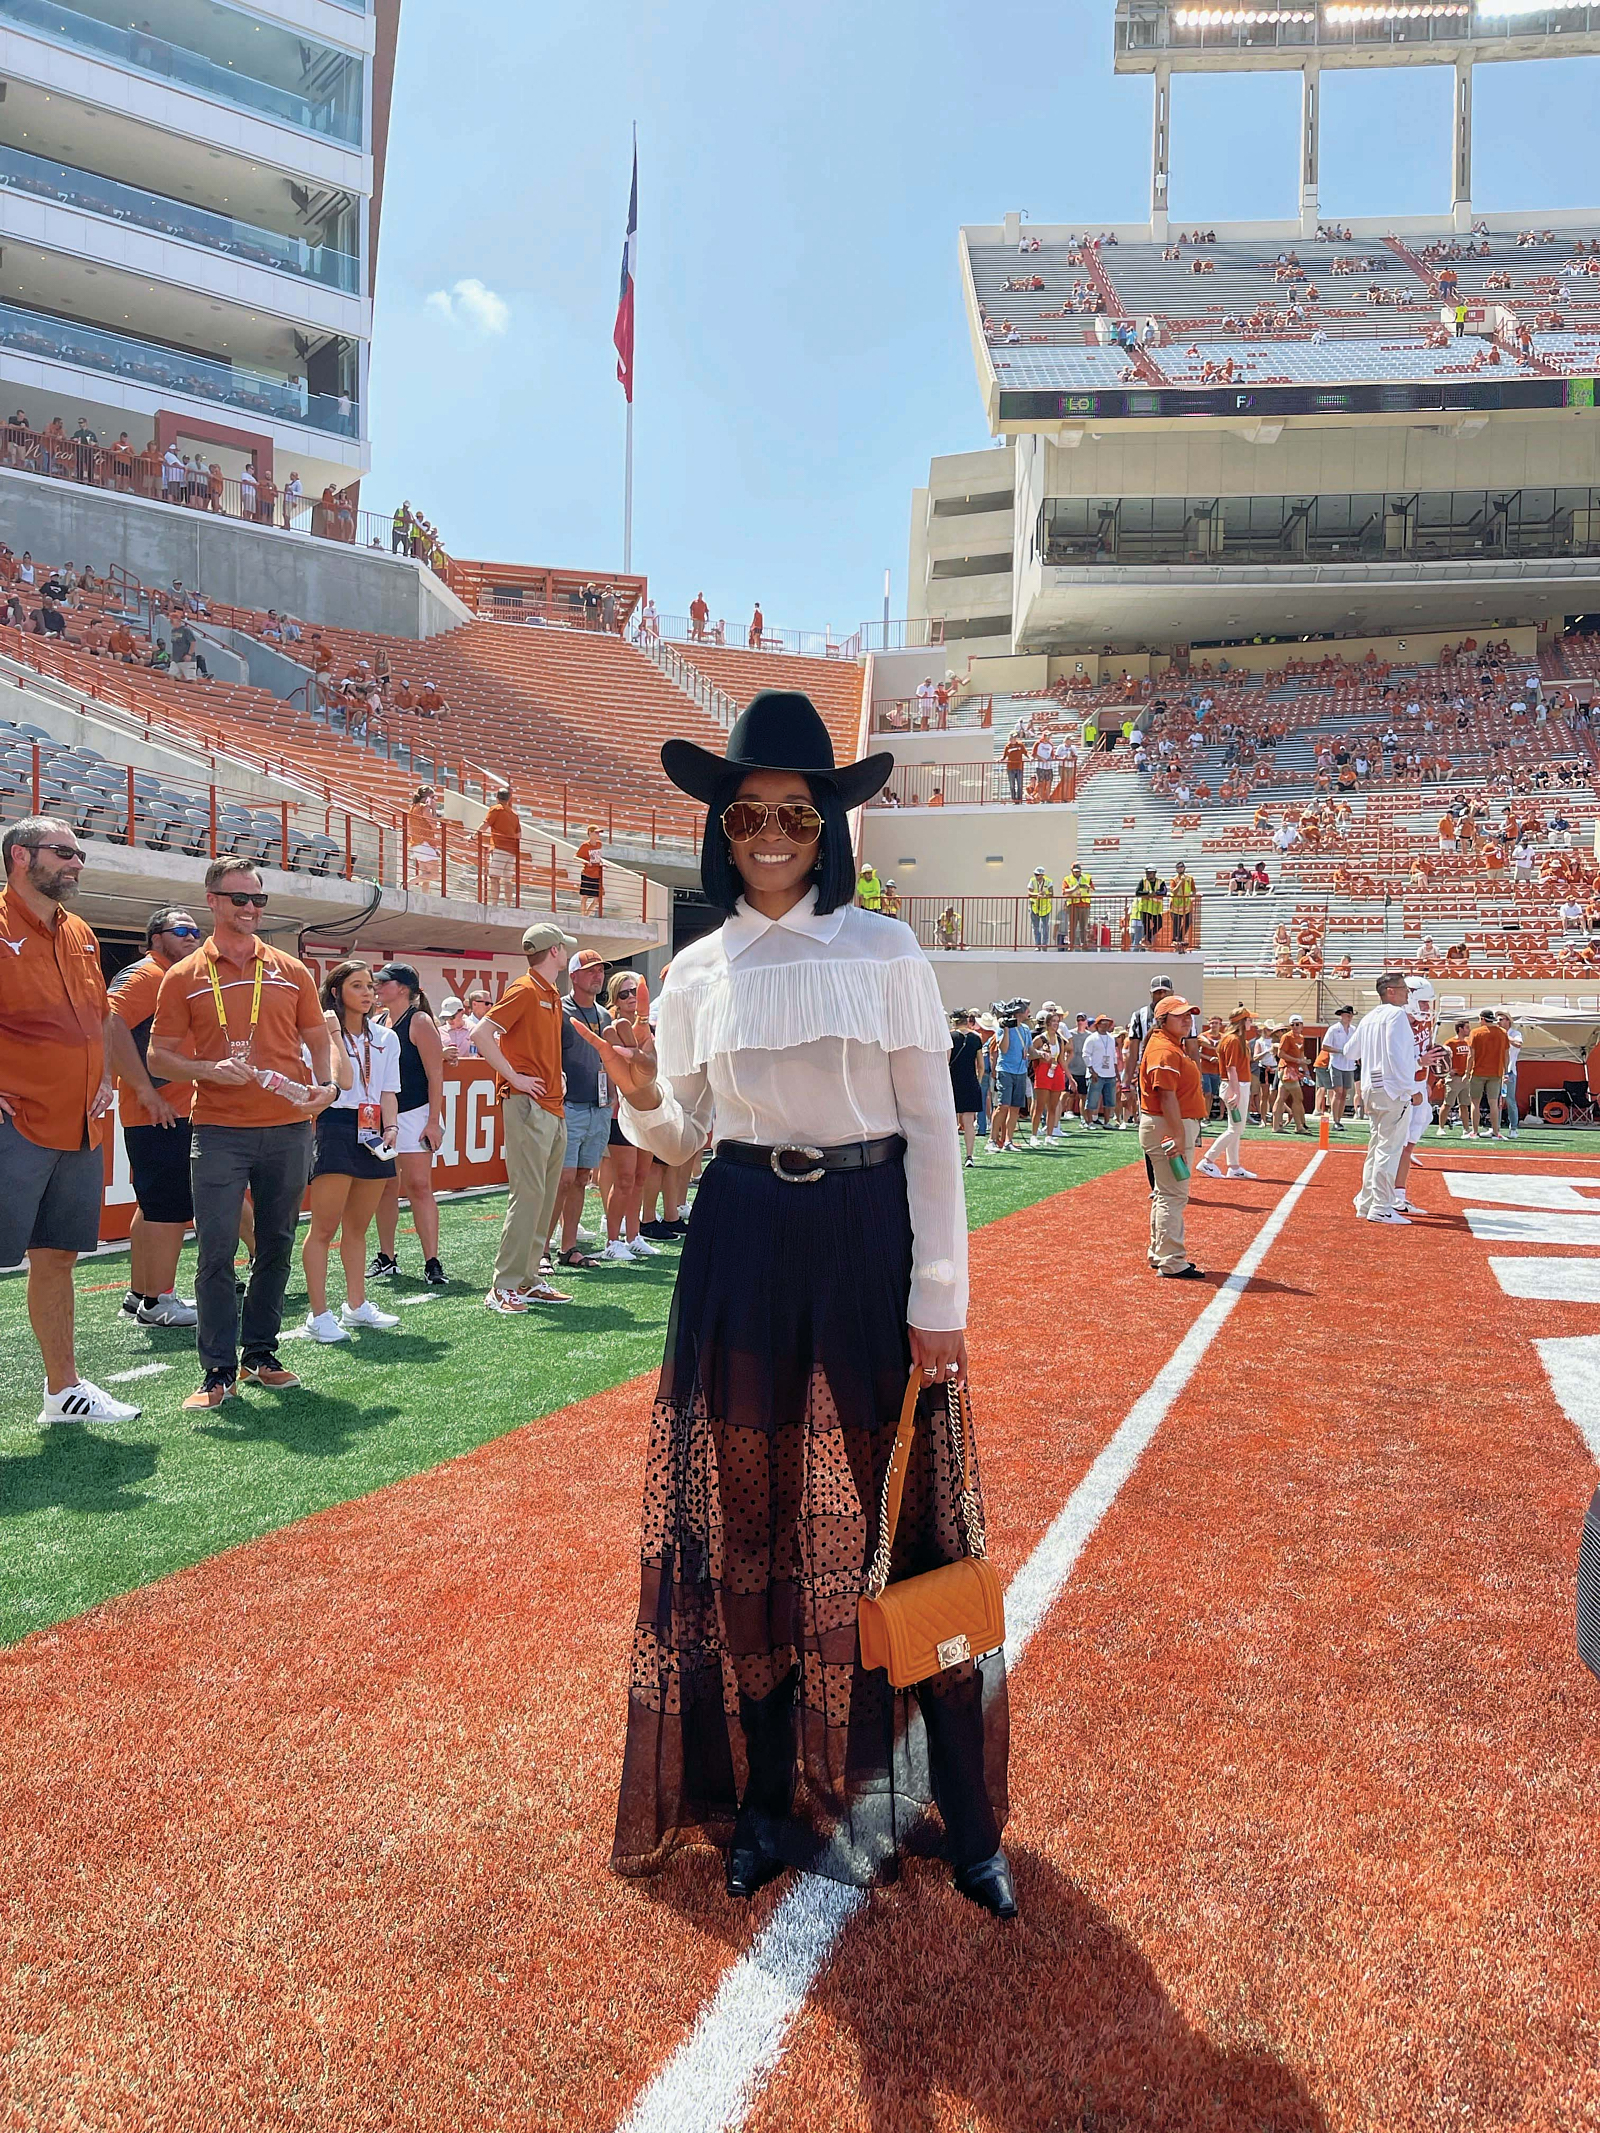 The First Lady of Texas Football Talks Gameday Fashion | The Alcalde